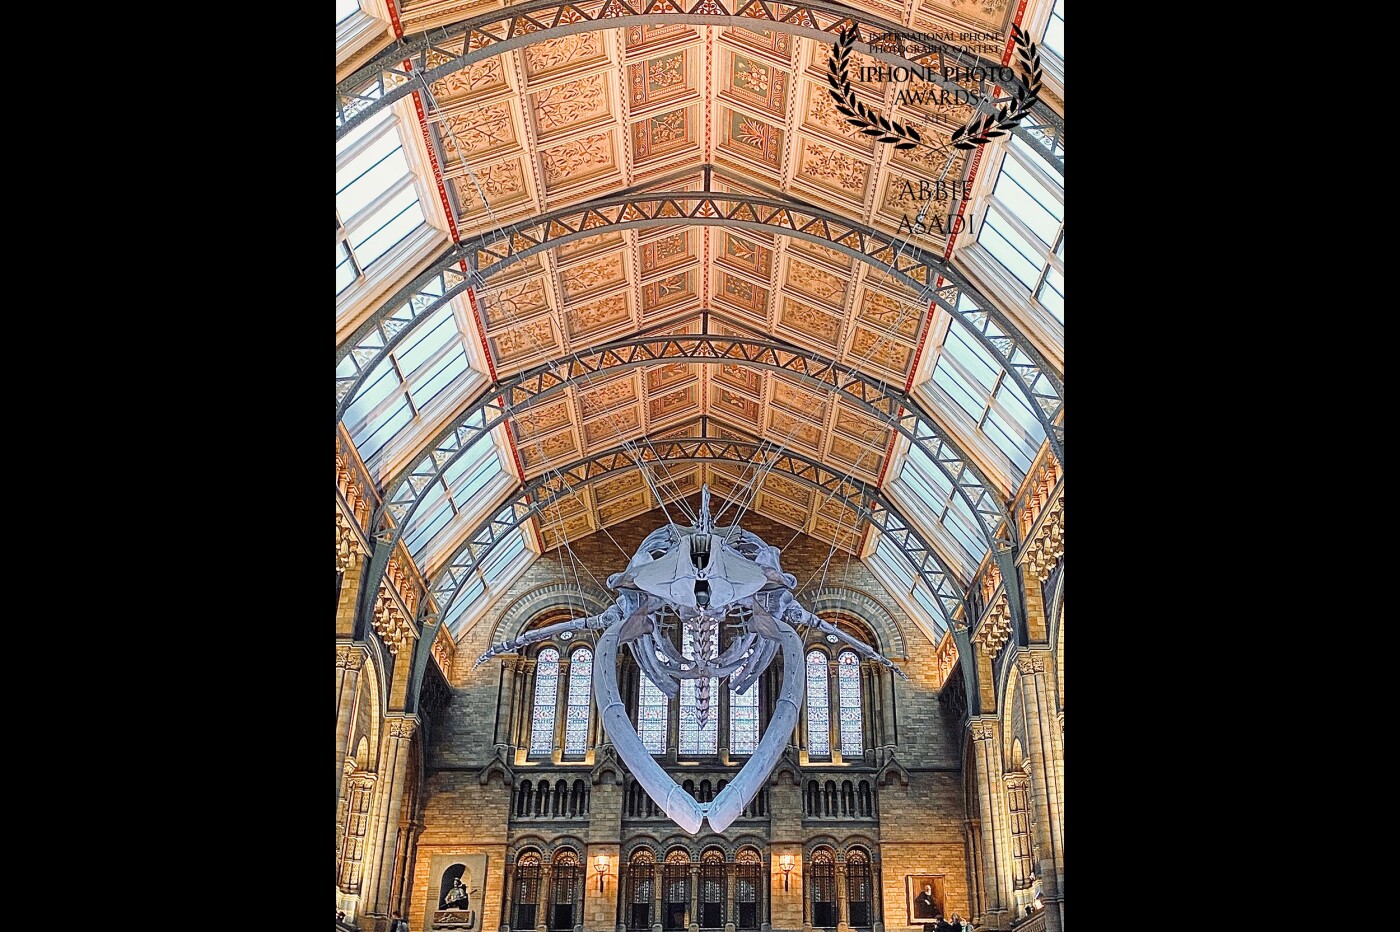 The blue whale sculpture at the Natural History Museum, London. I was in awe of its size and shape and yet it fits so well into its surroundings. The symmetry of the room lent itself well to this composition. 